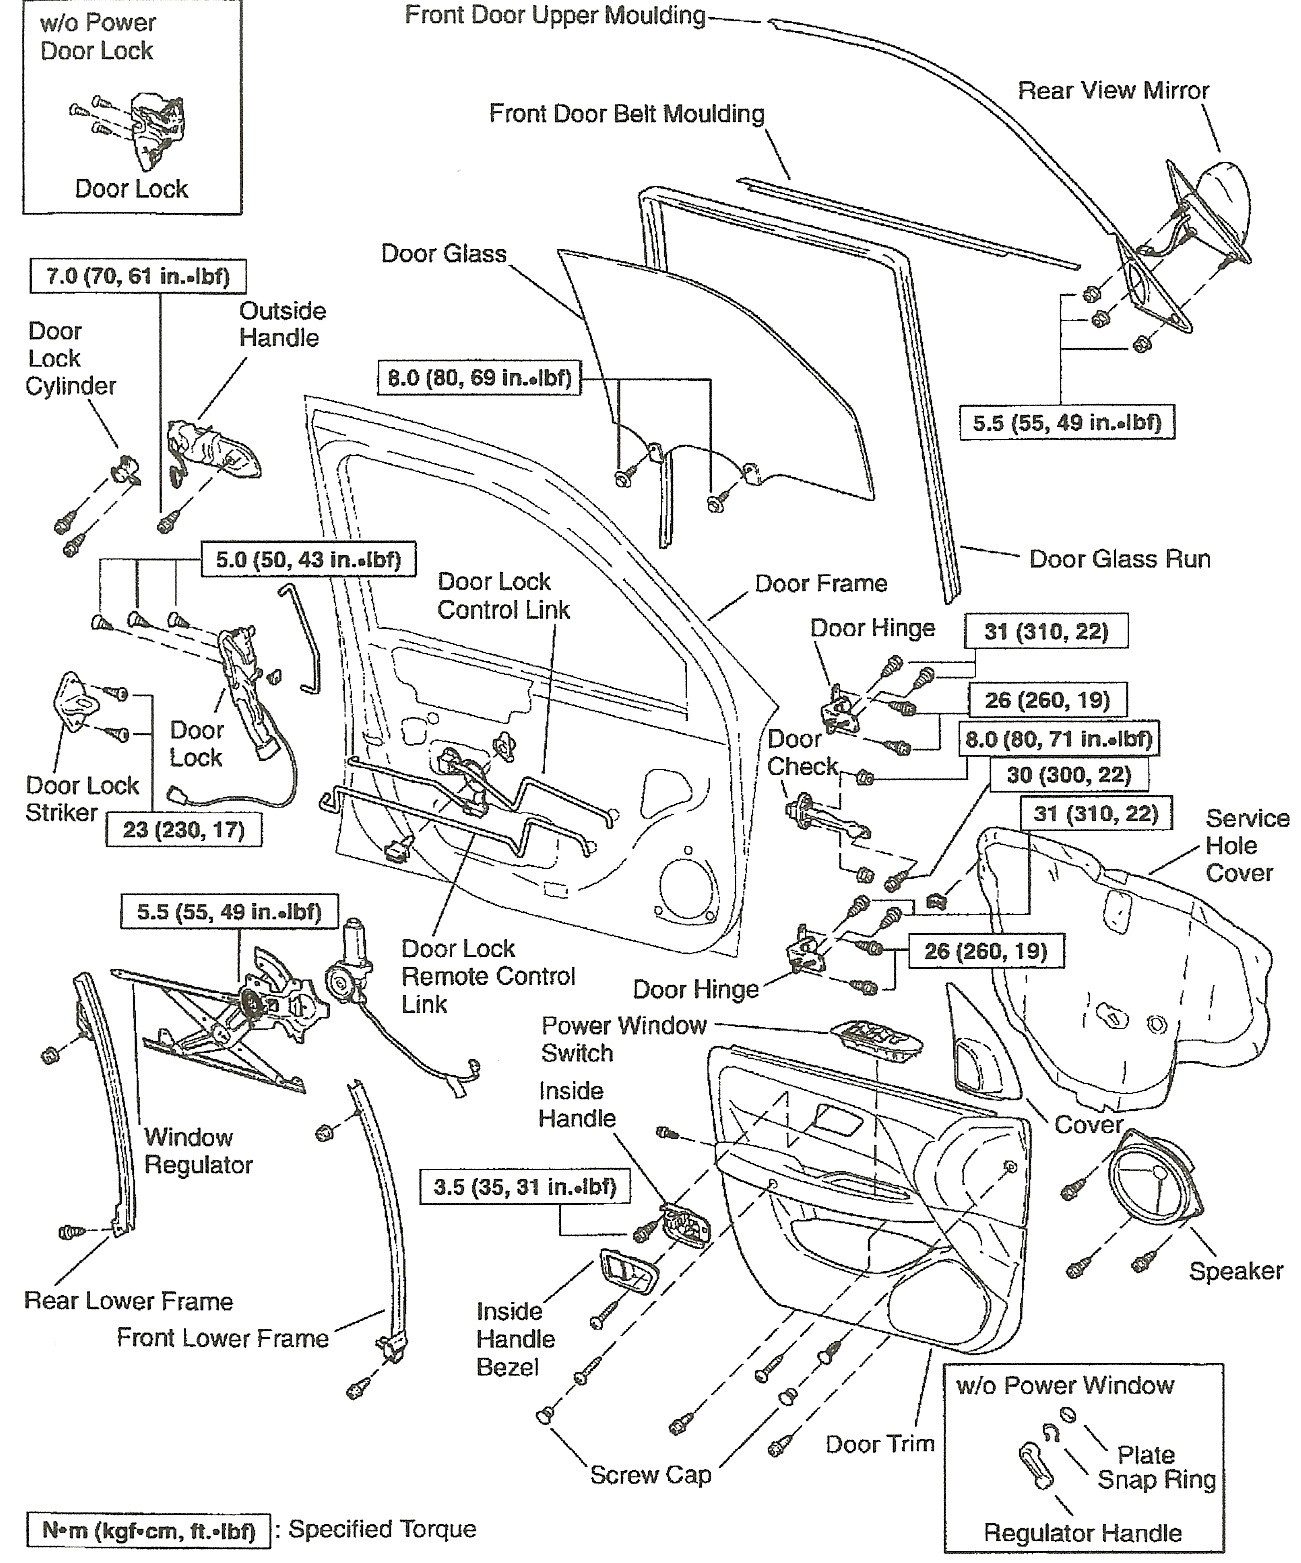 2007 toyota Tundra Parts Diagram Tundra Engine Diagram 2001 Wiring Wiring Diagrams Instructions Of 2007 toyota Tundra Parts Diagram